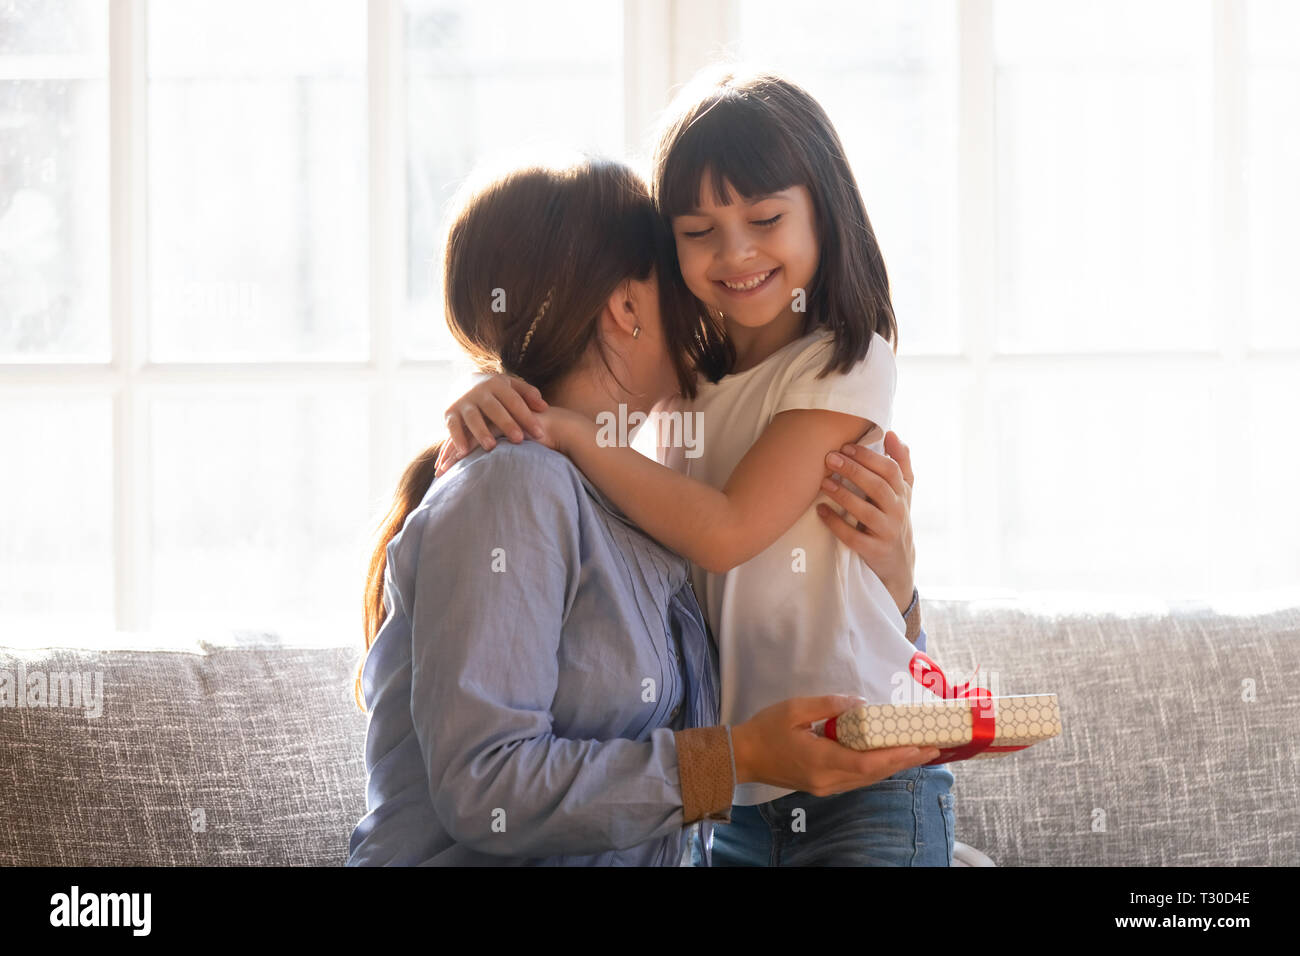 Mother embracing daughter expressing gratitude for received gift Stock Photo